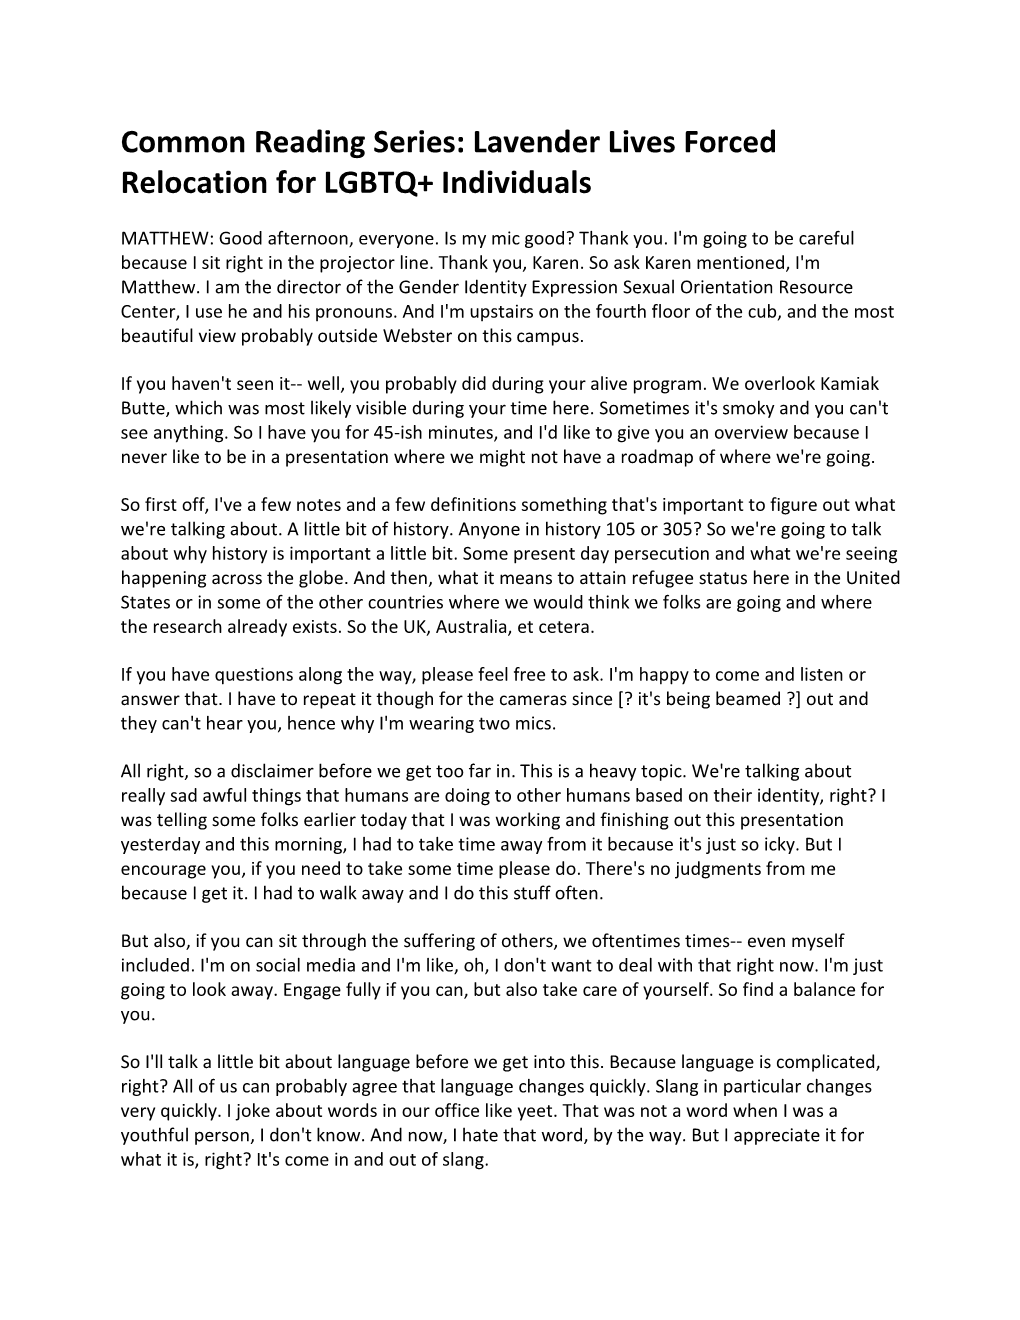 Lavender Lives Forced Relocation for LGBTQ+ Individuals